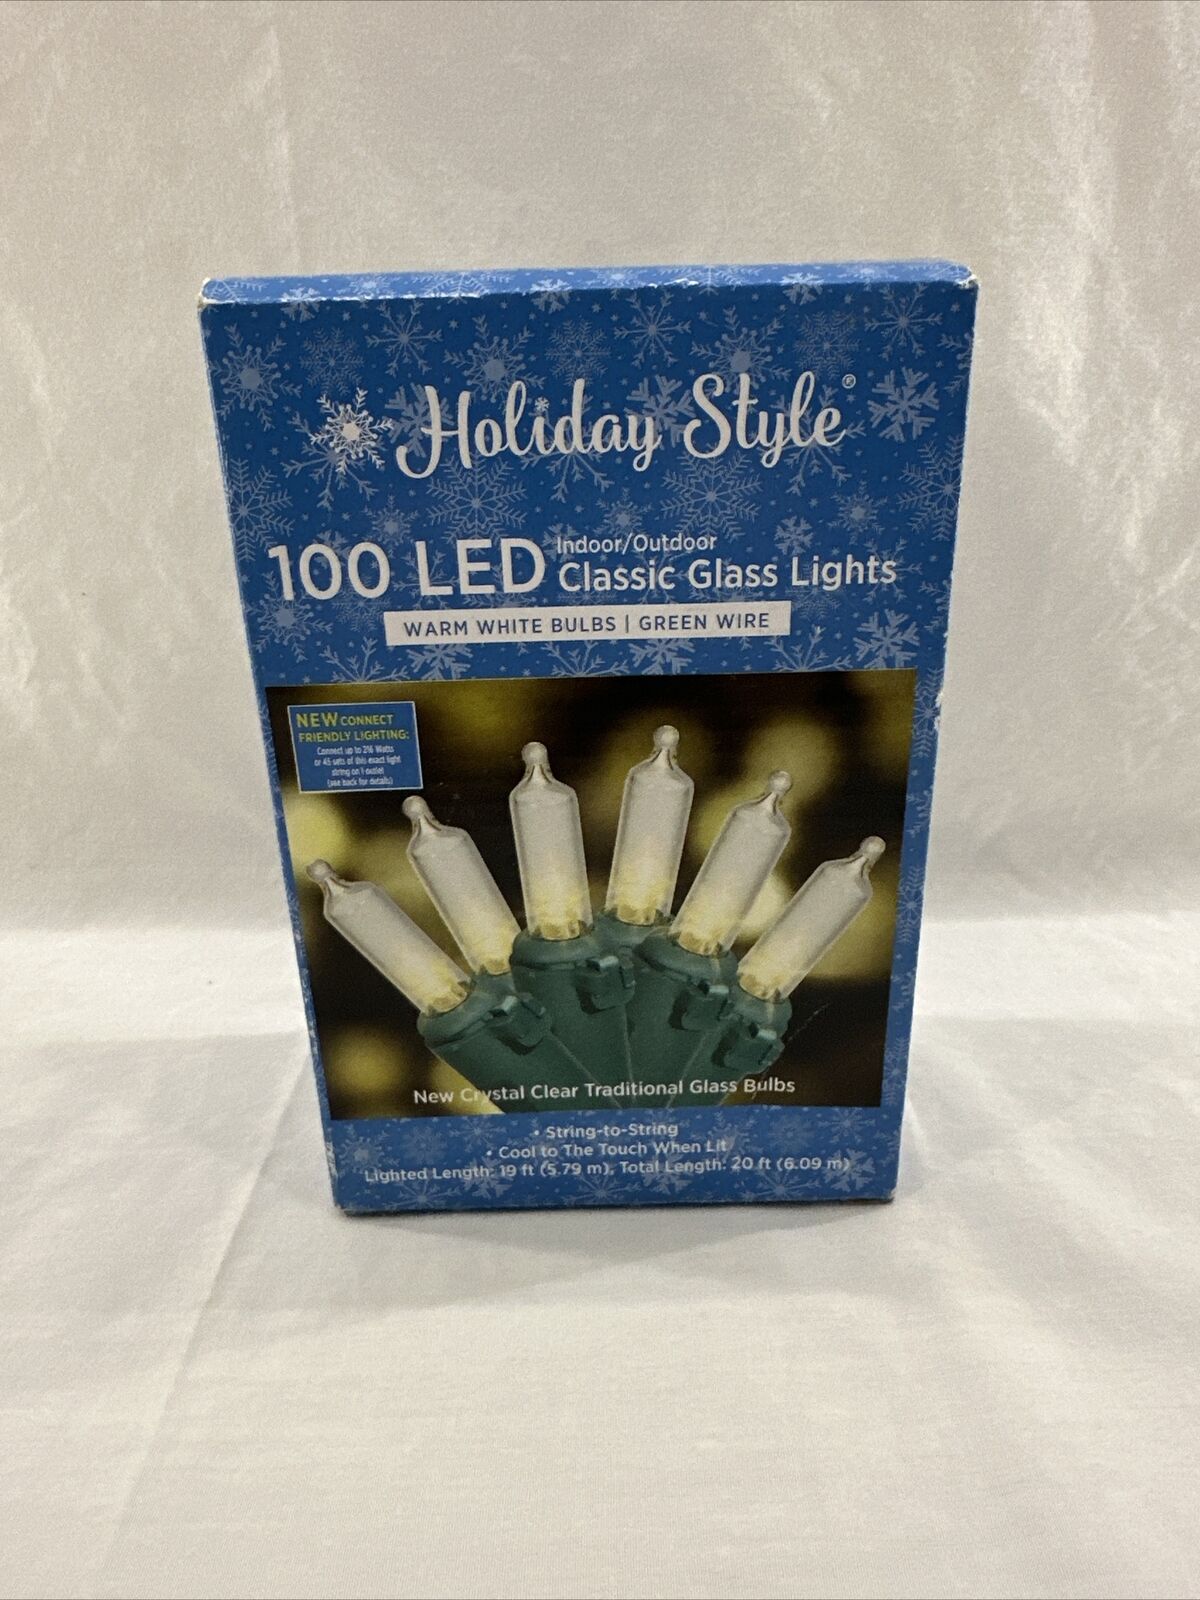 Holiday Style 100 LED Warm Classic Glass Lights Indoor/Outdoor 19’